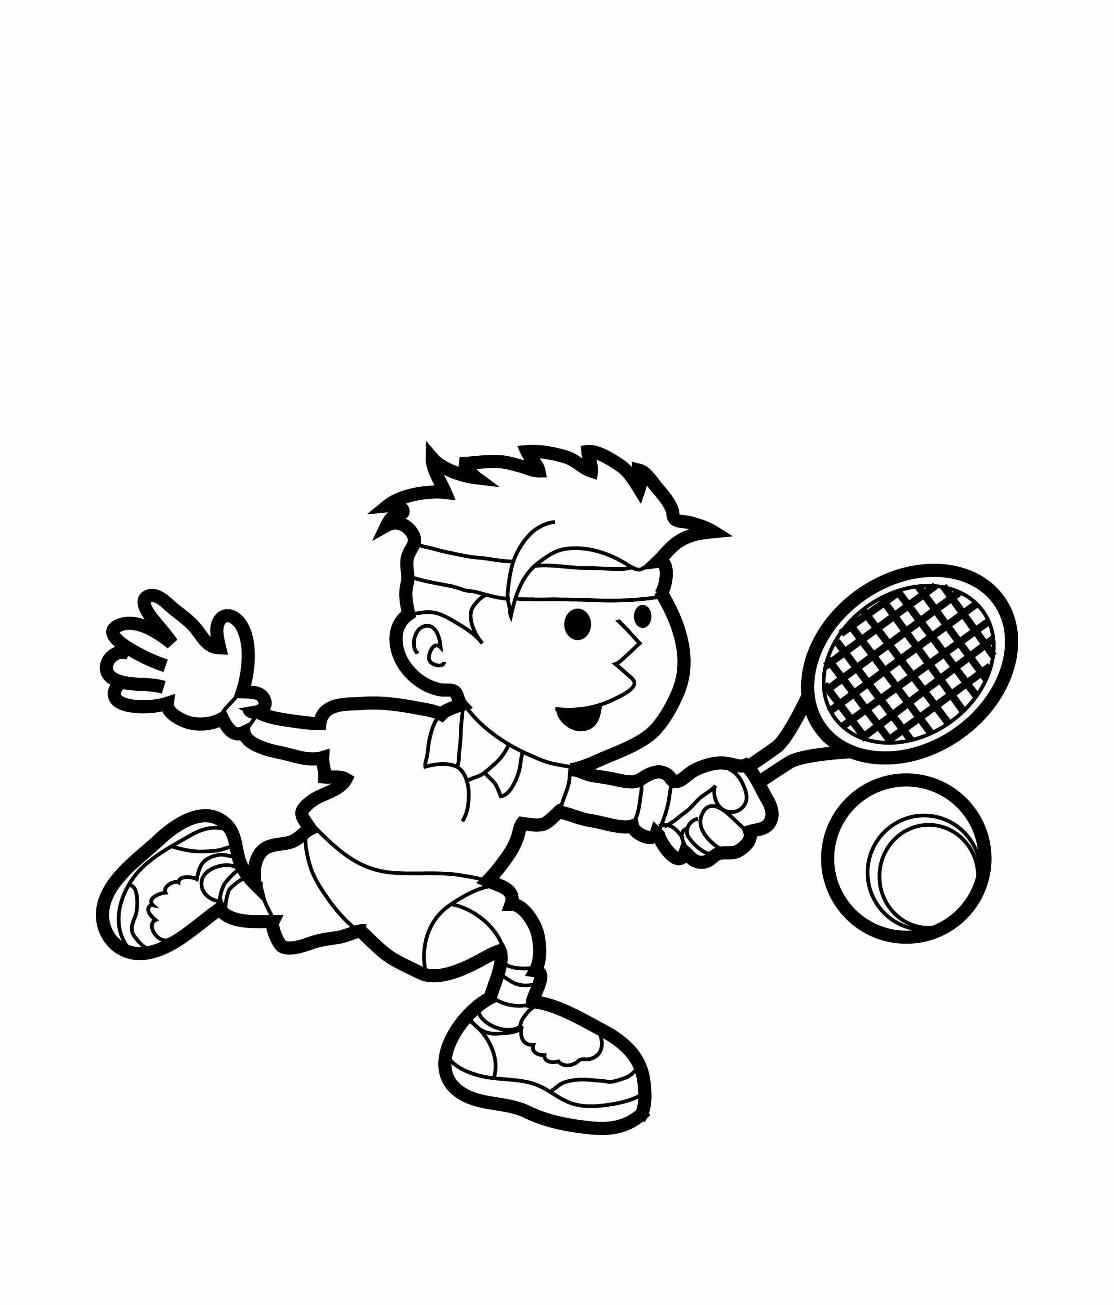 Tennis Coloring Pages for childrens printable for free